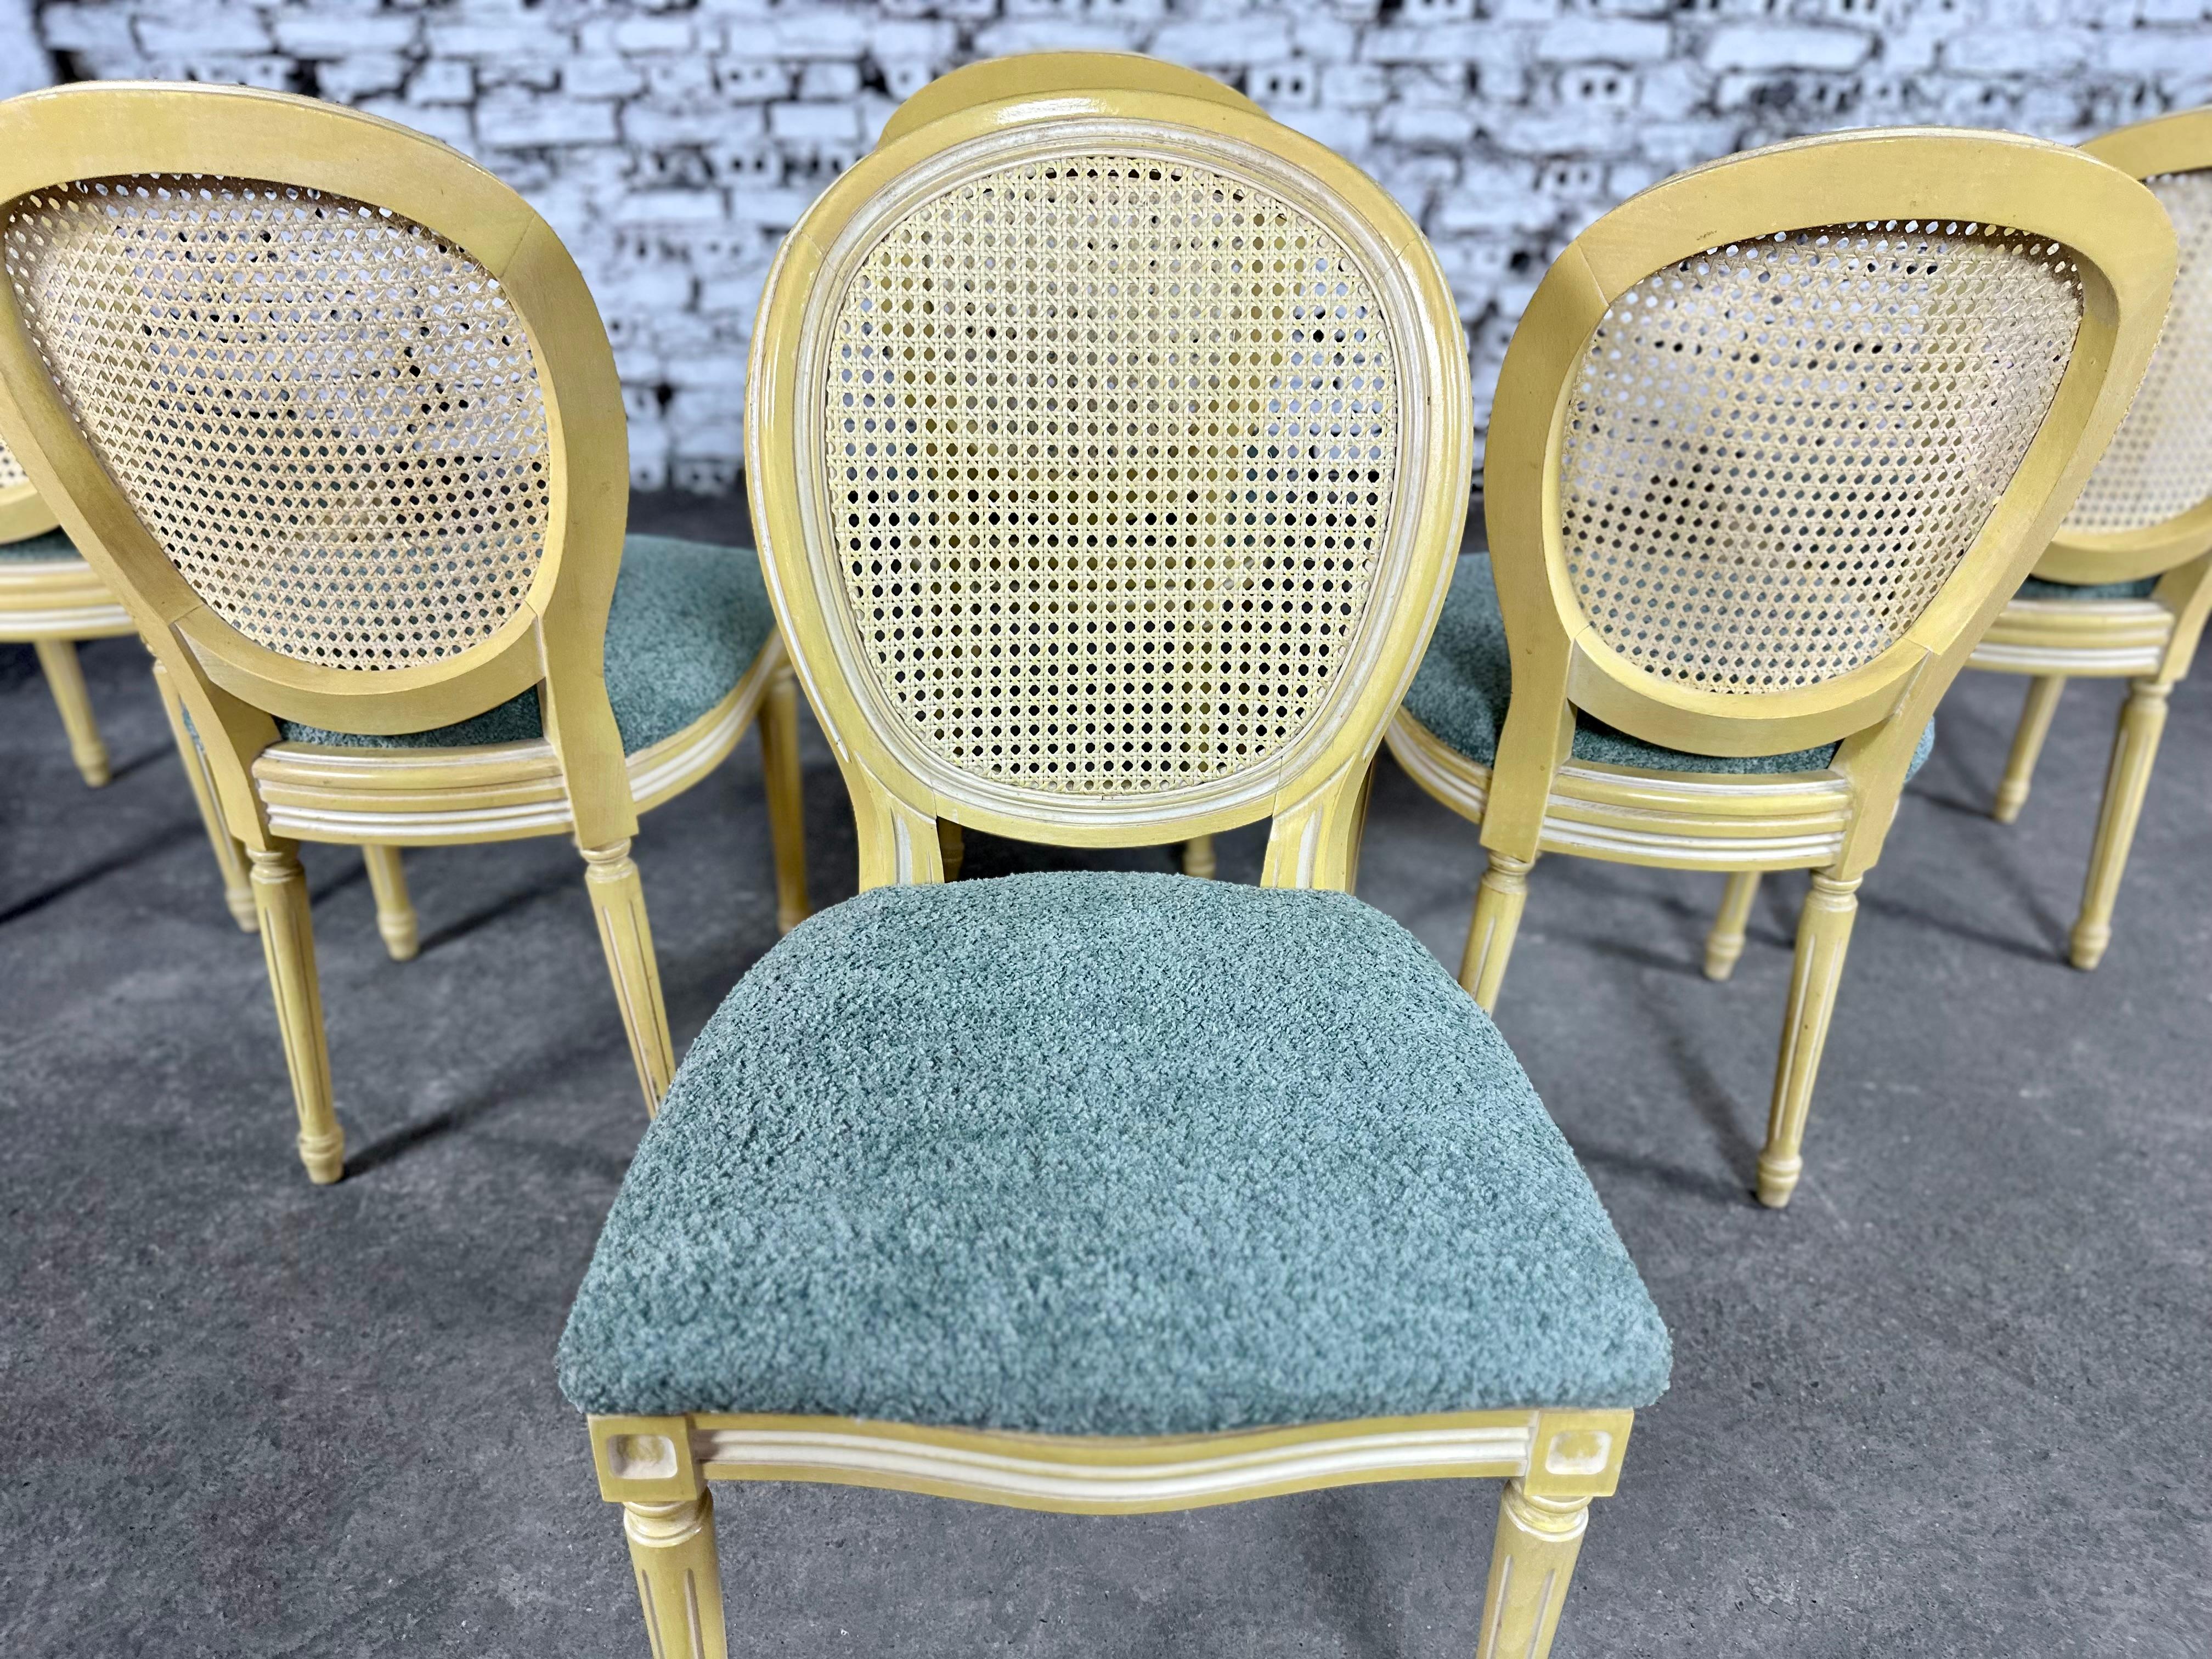 20th Century Renewed Louis XVI Style Medallion Cane Back Dining Chairs - Set of 6 For Sale